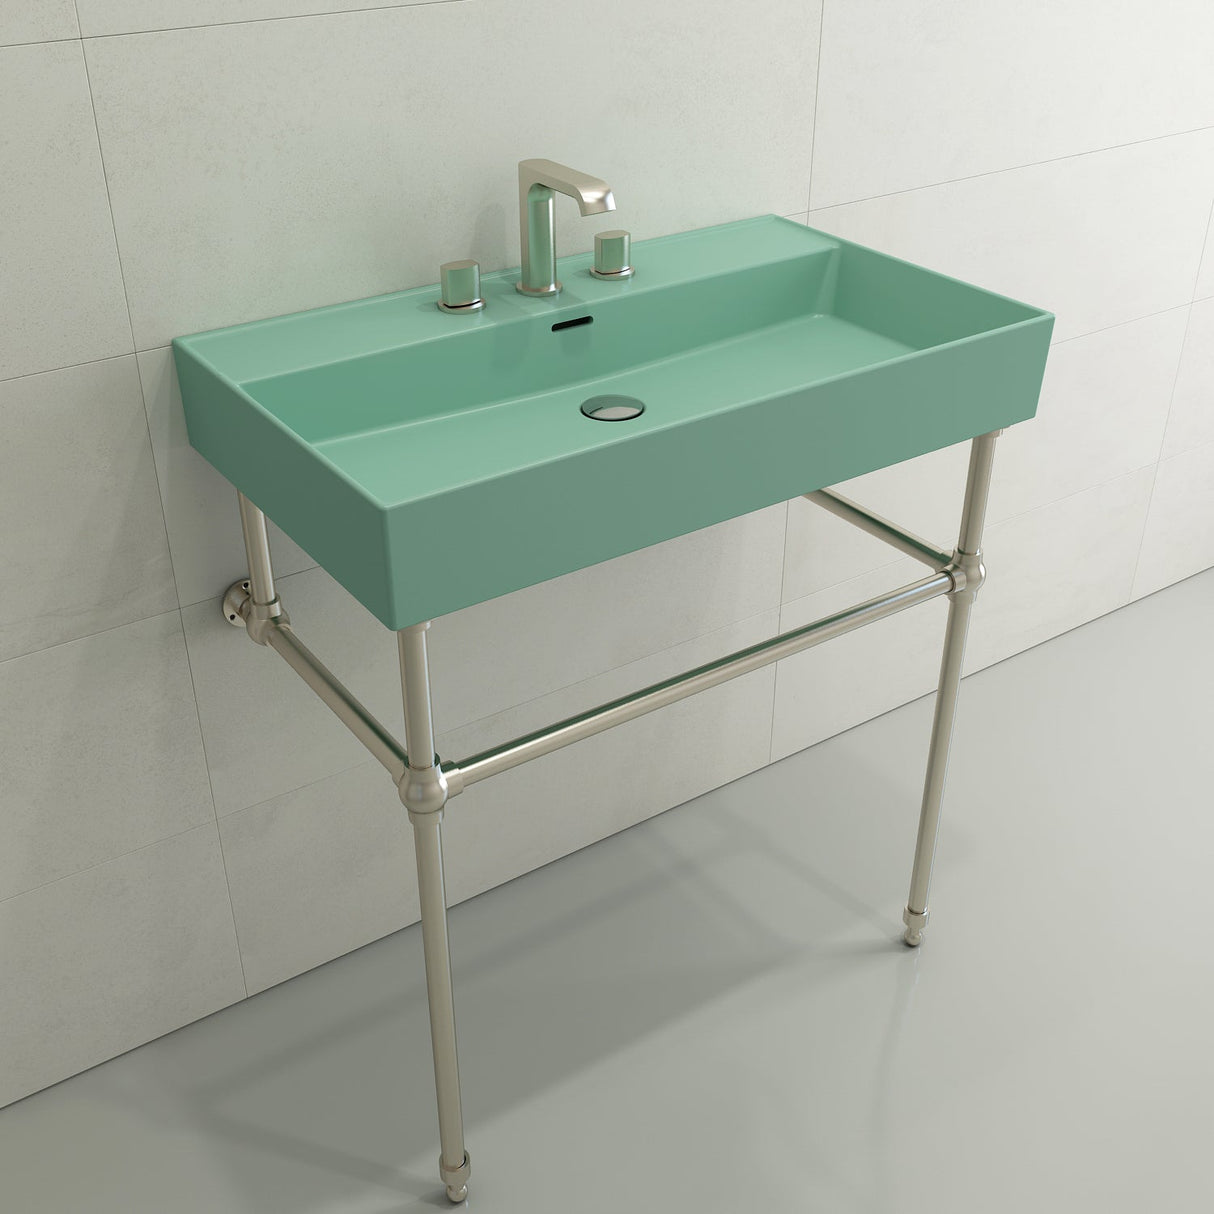 BOCCHI 1377-033-0127 Milano Wall-Mounted Sink Fireclay 32 in. 3-Hole with Overflow in Matte Mint Green